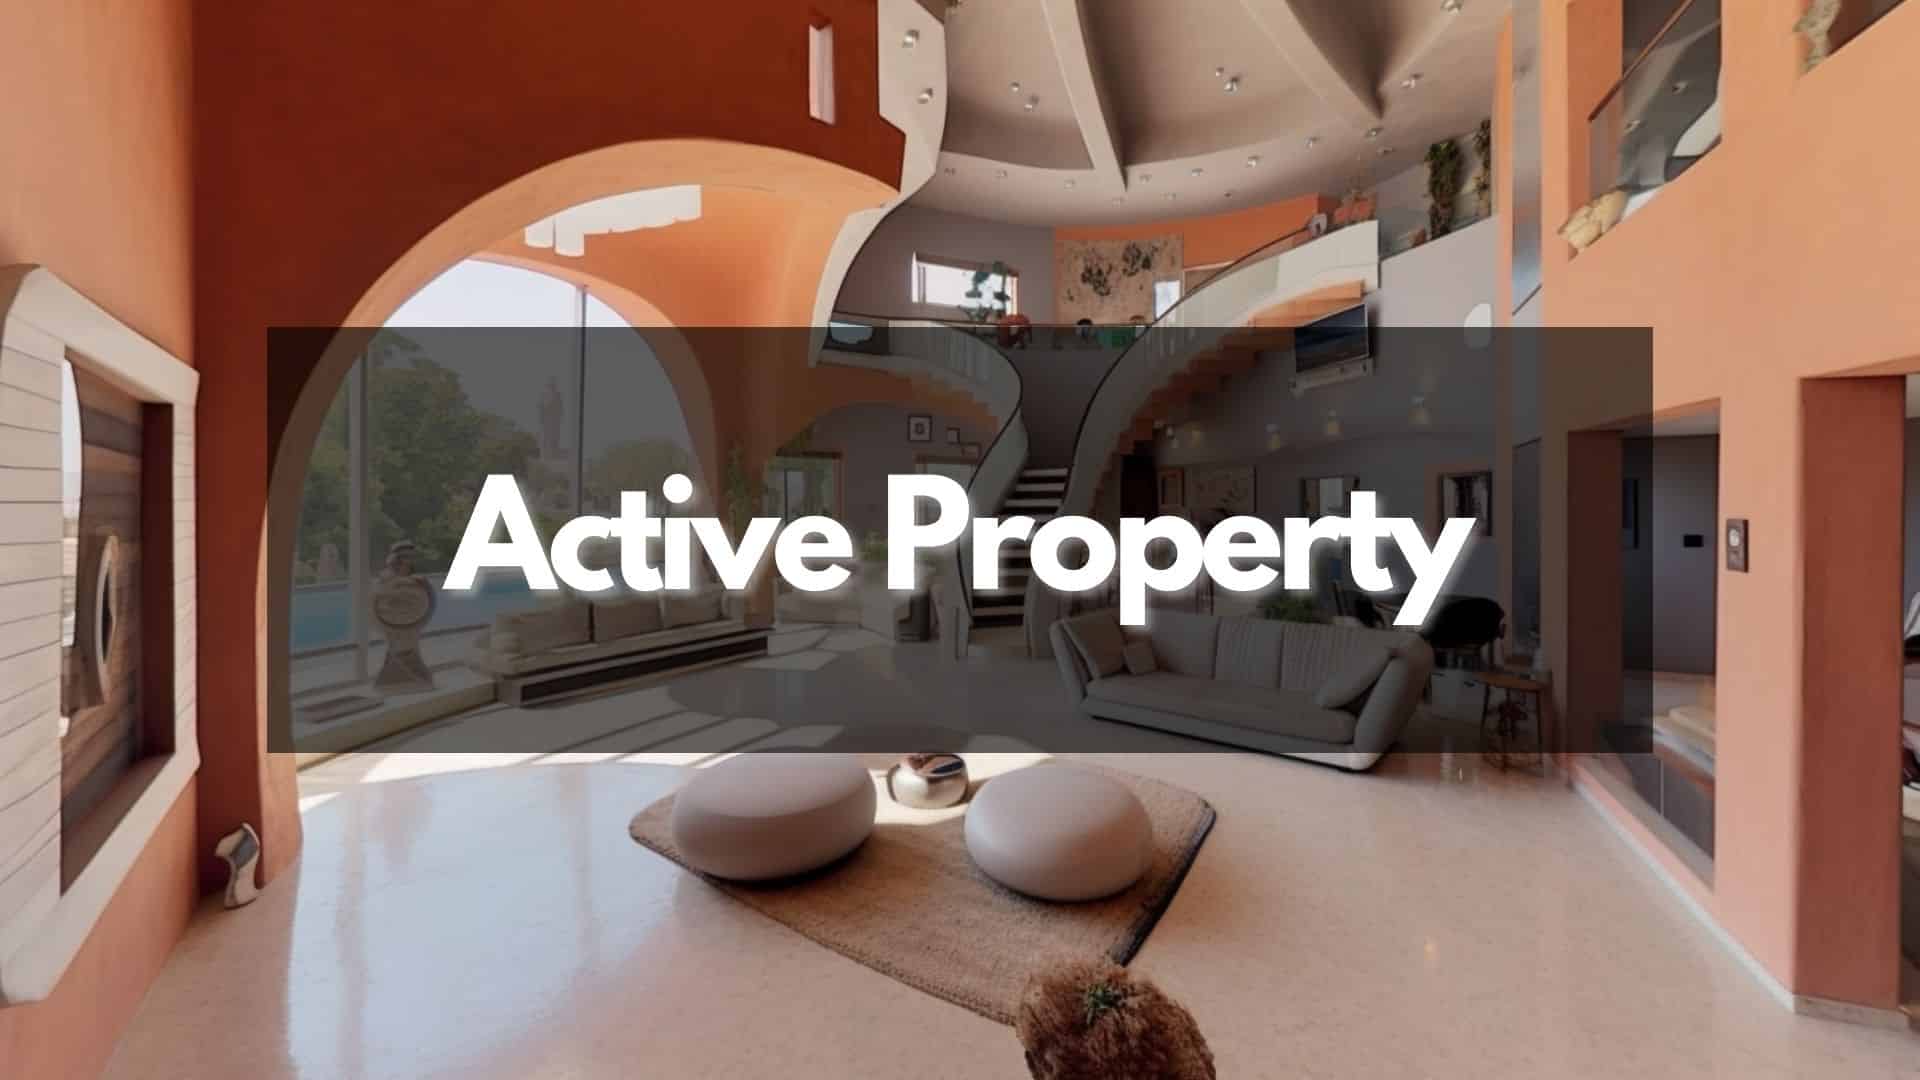 Active Property Definition